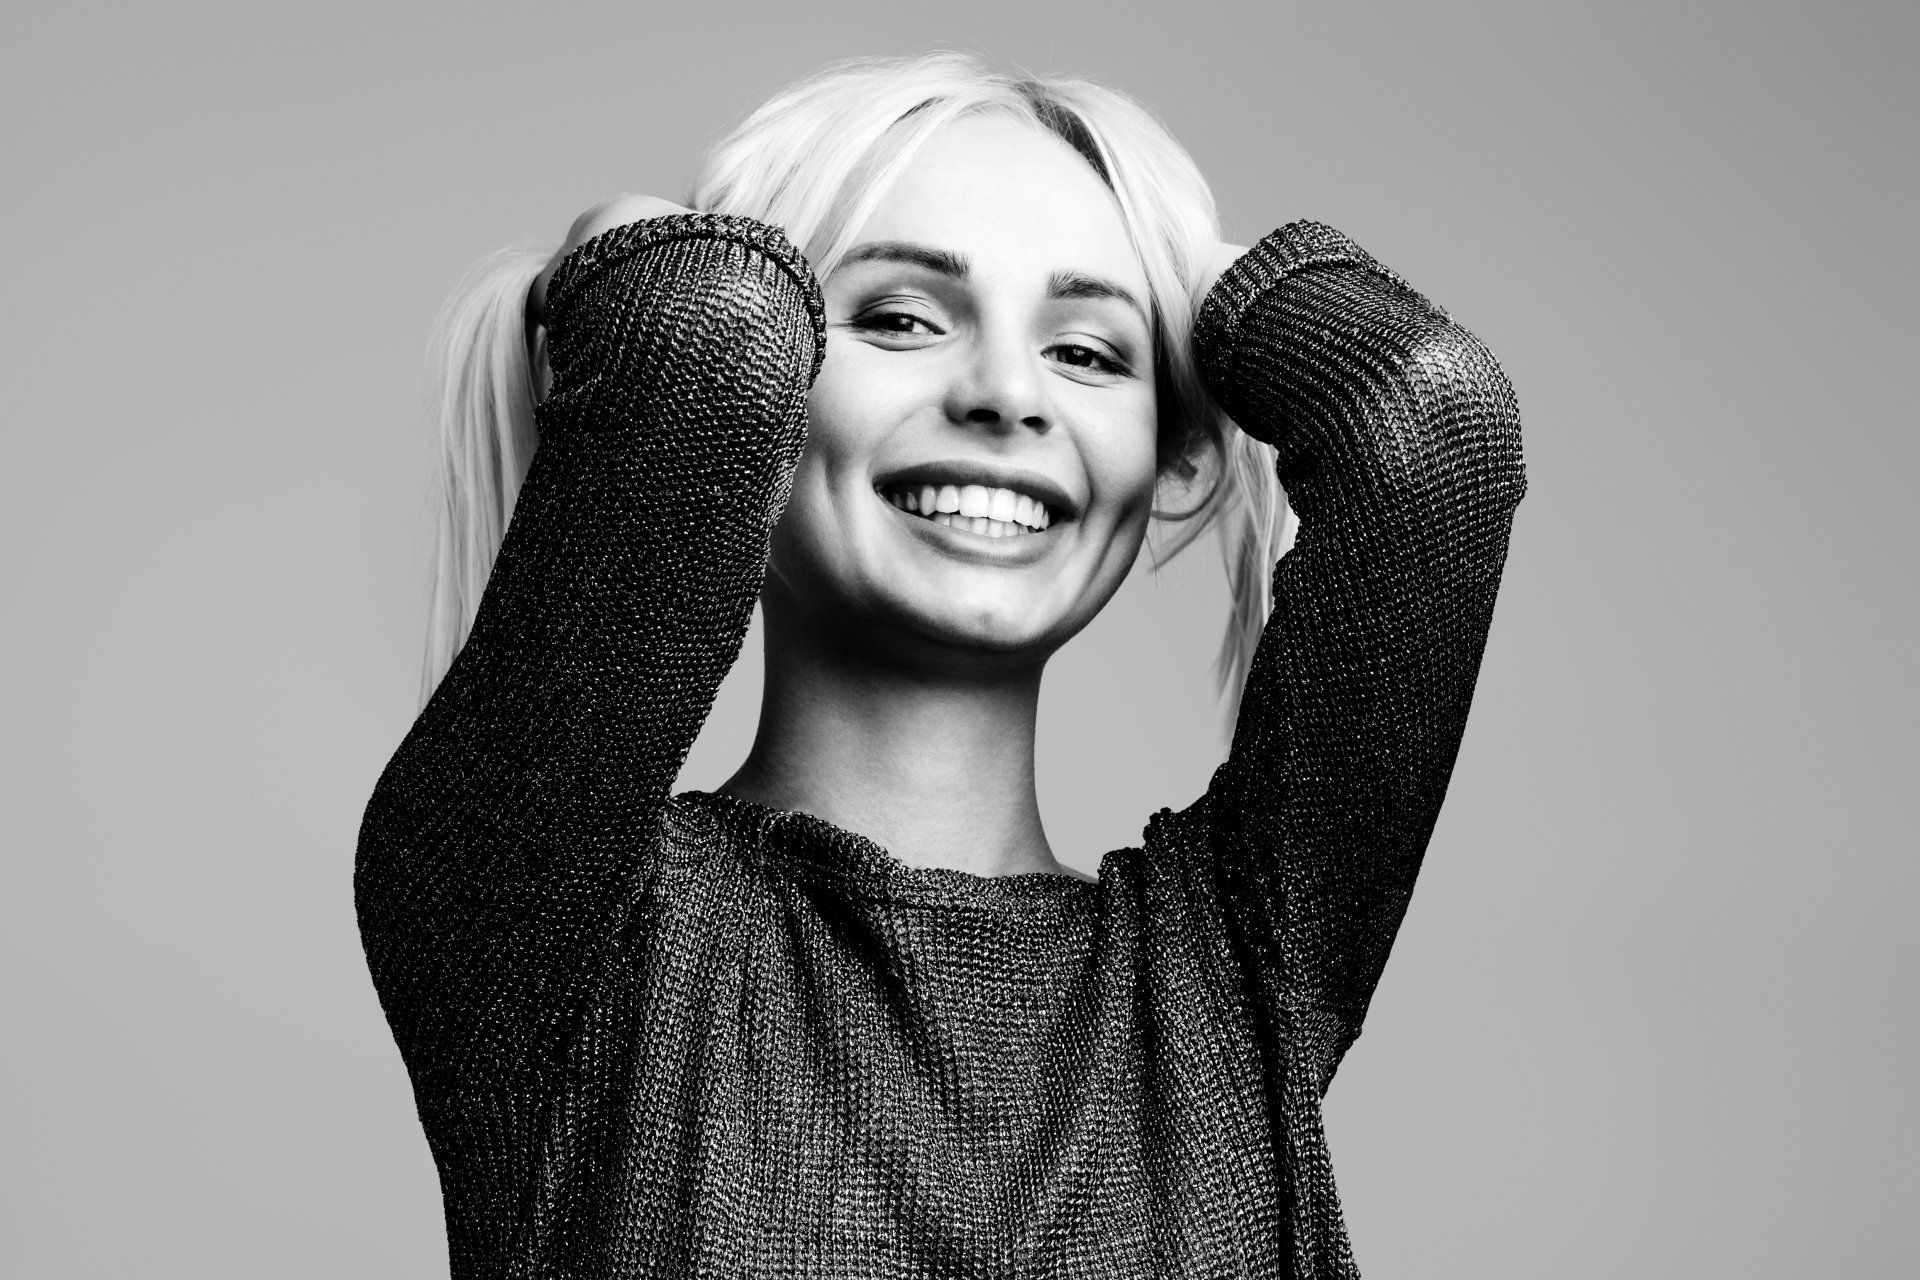 A woman in a sweater is smiling in a black and white photo.